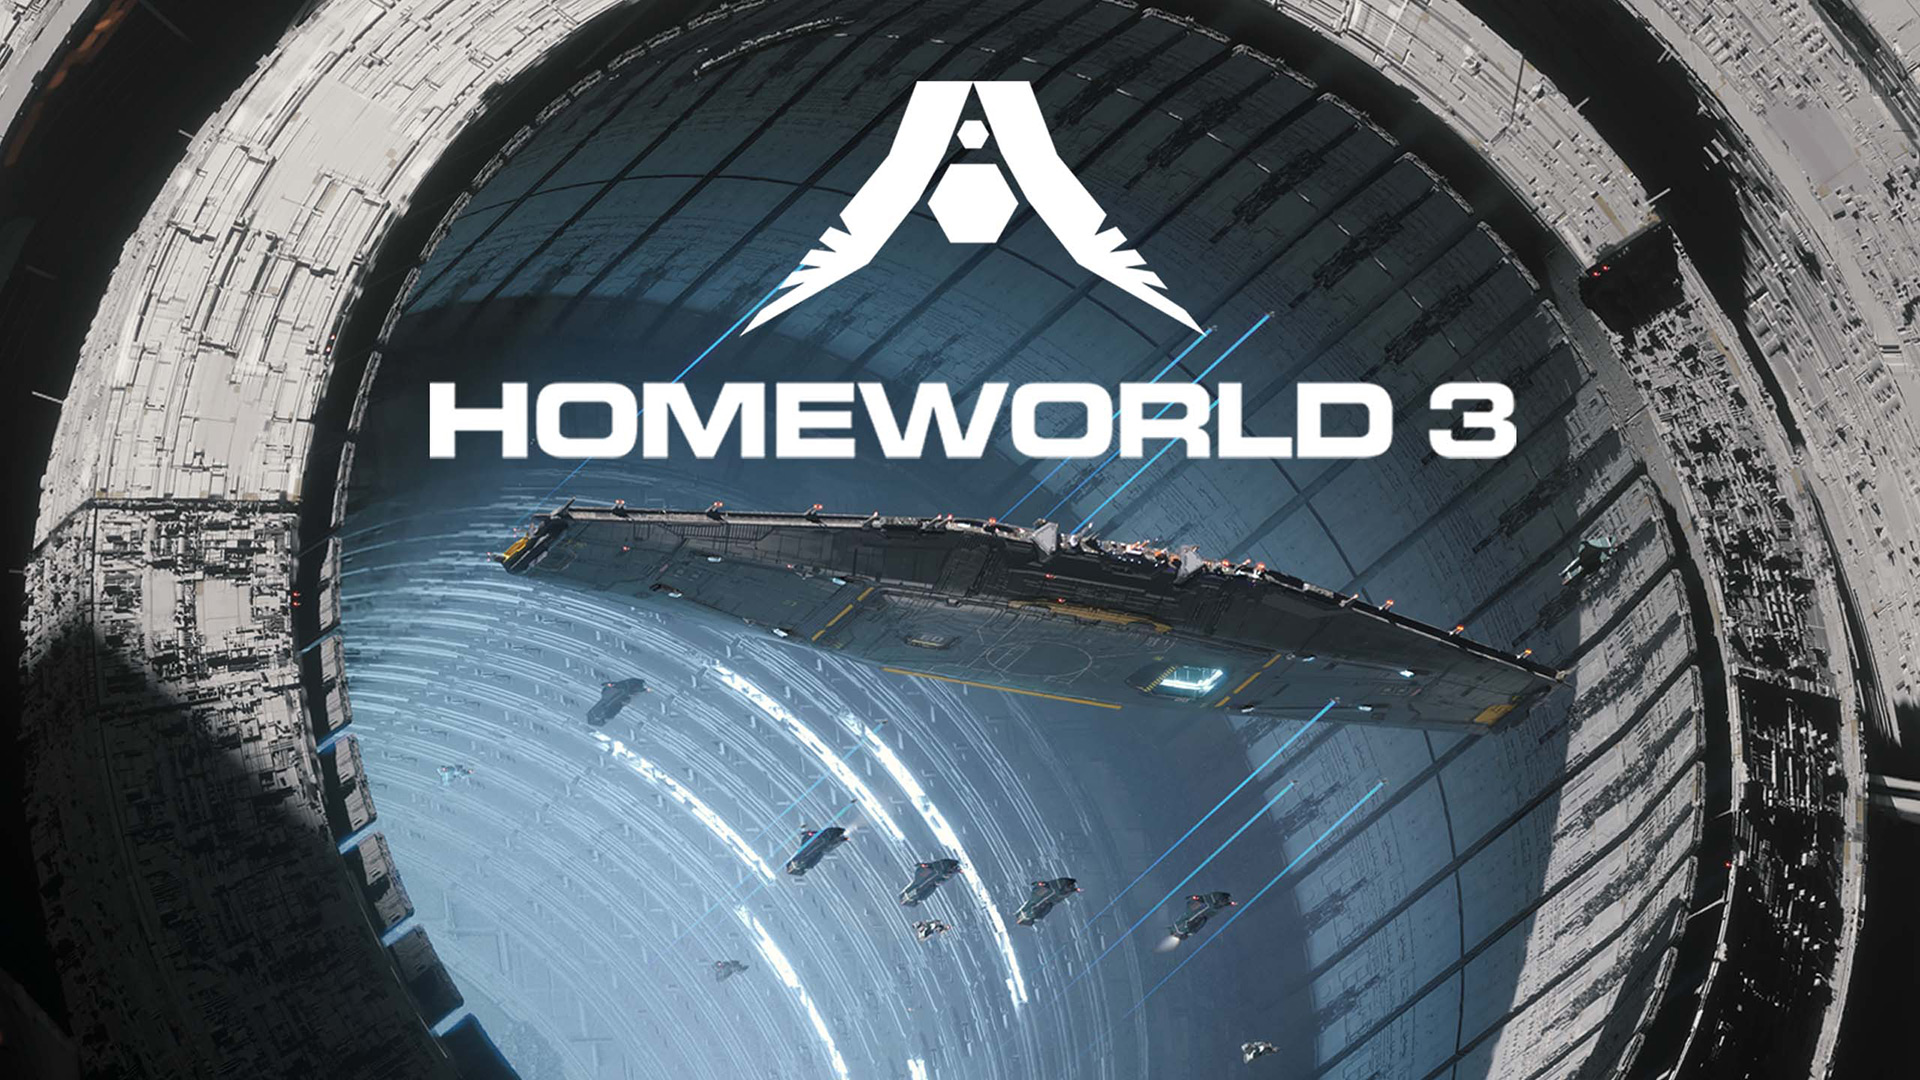 Homeworld 3 has been delayed to February 2024